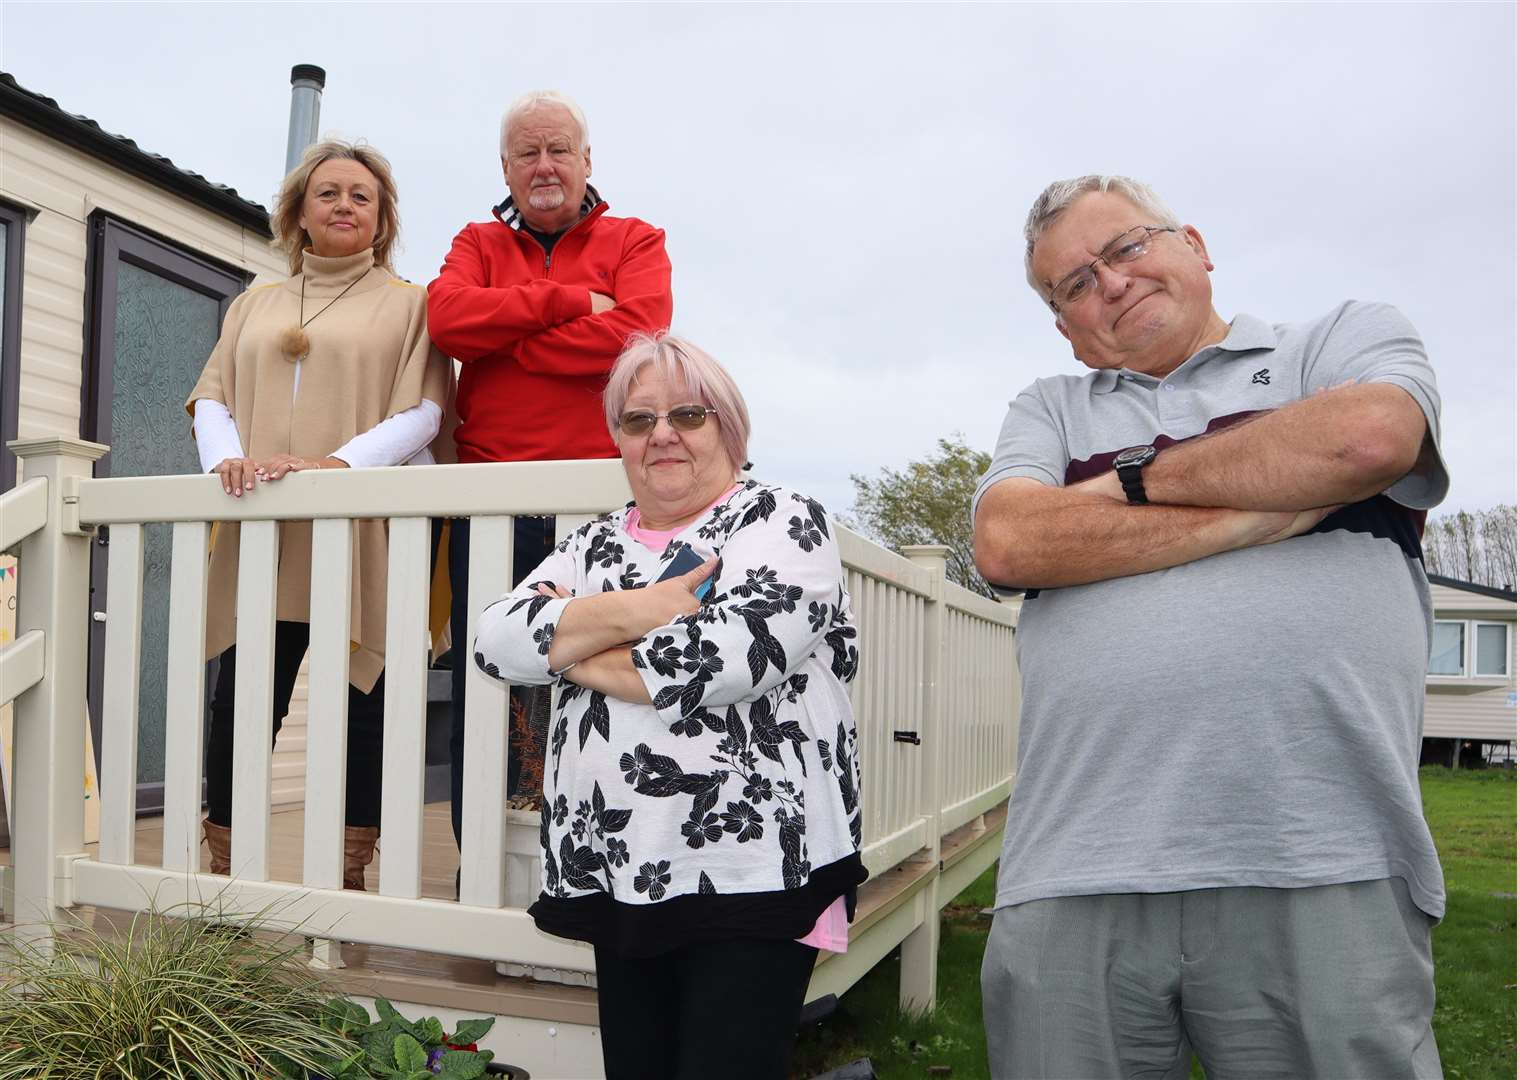 Residents at Ashcroft Coast holiday park in Plough Road, Minster. From the left, Jane and Graeme Fothergill and Sue and Tony Downs